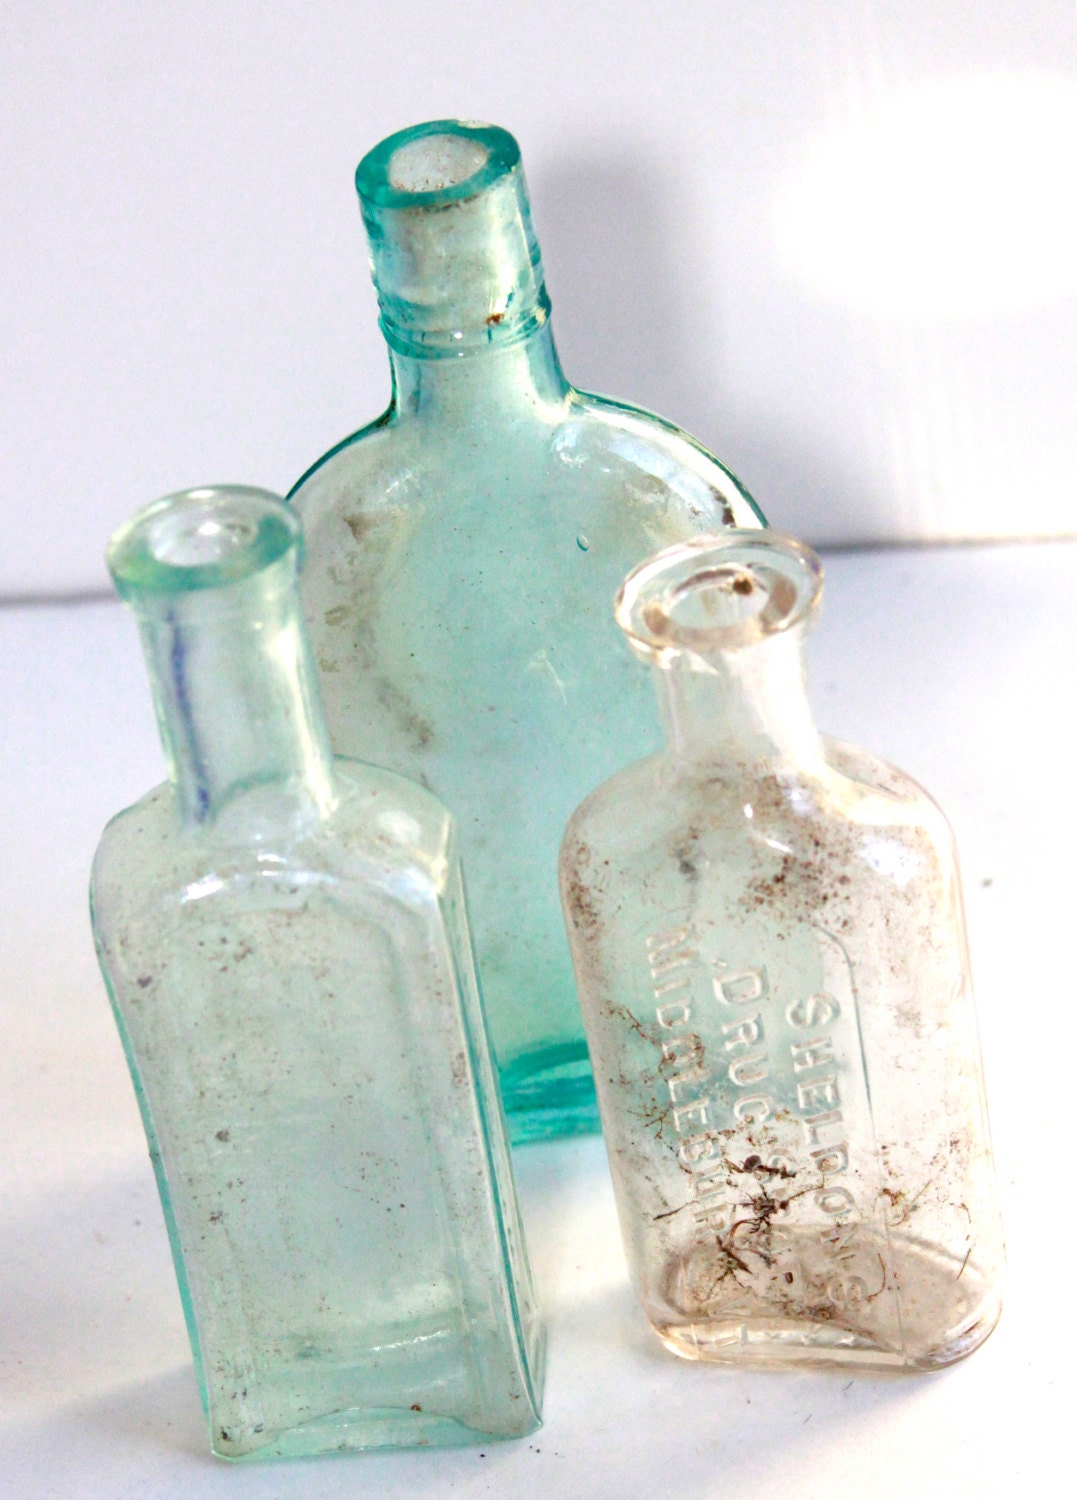 Download Set of 3 vintage glass bottles blue and clear glass by ...